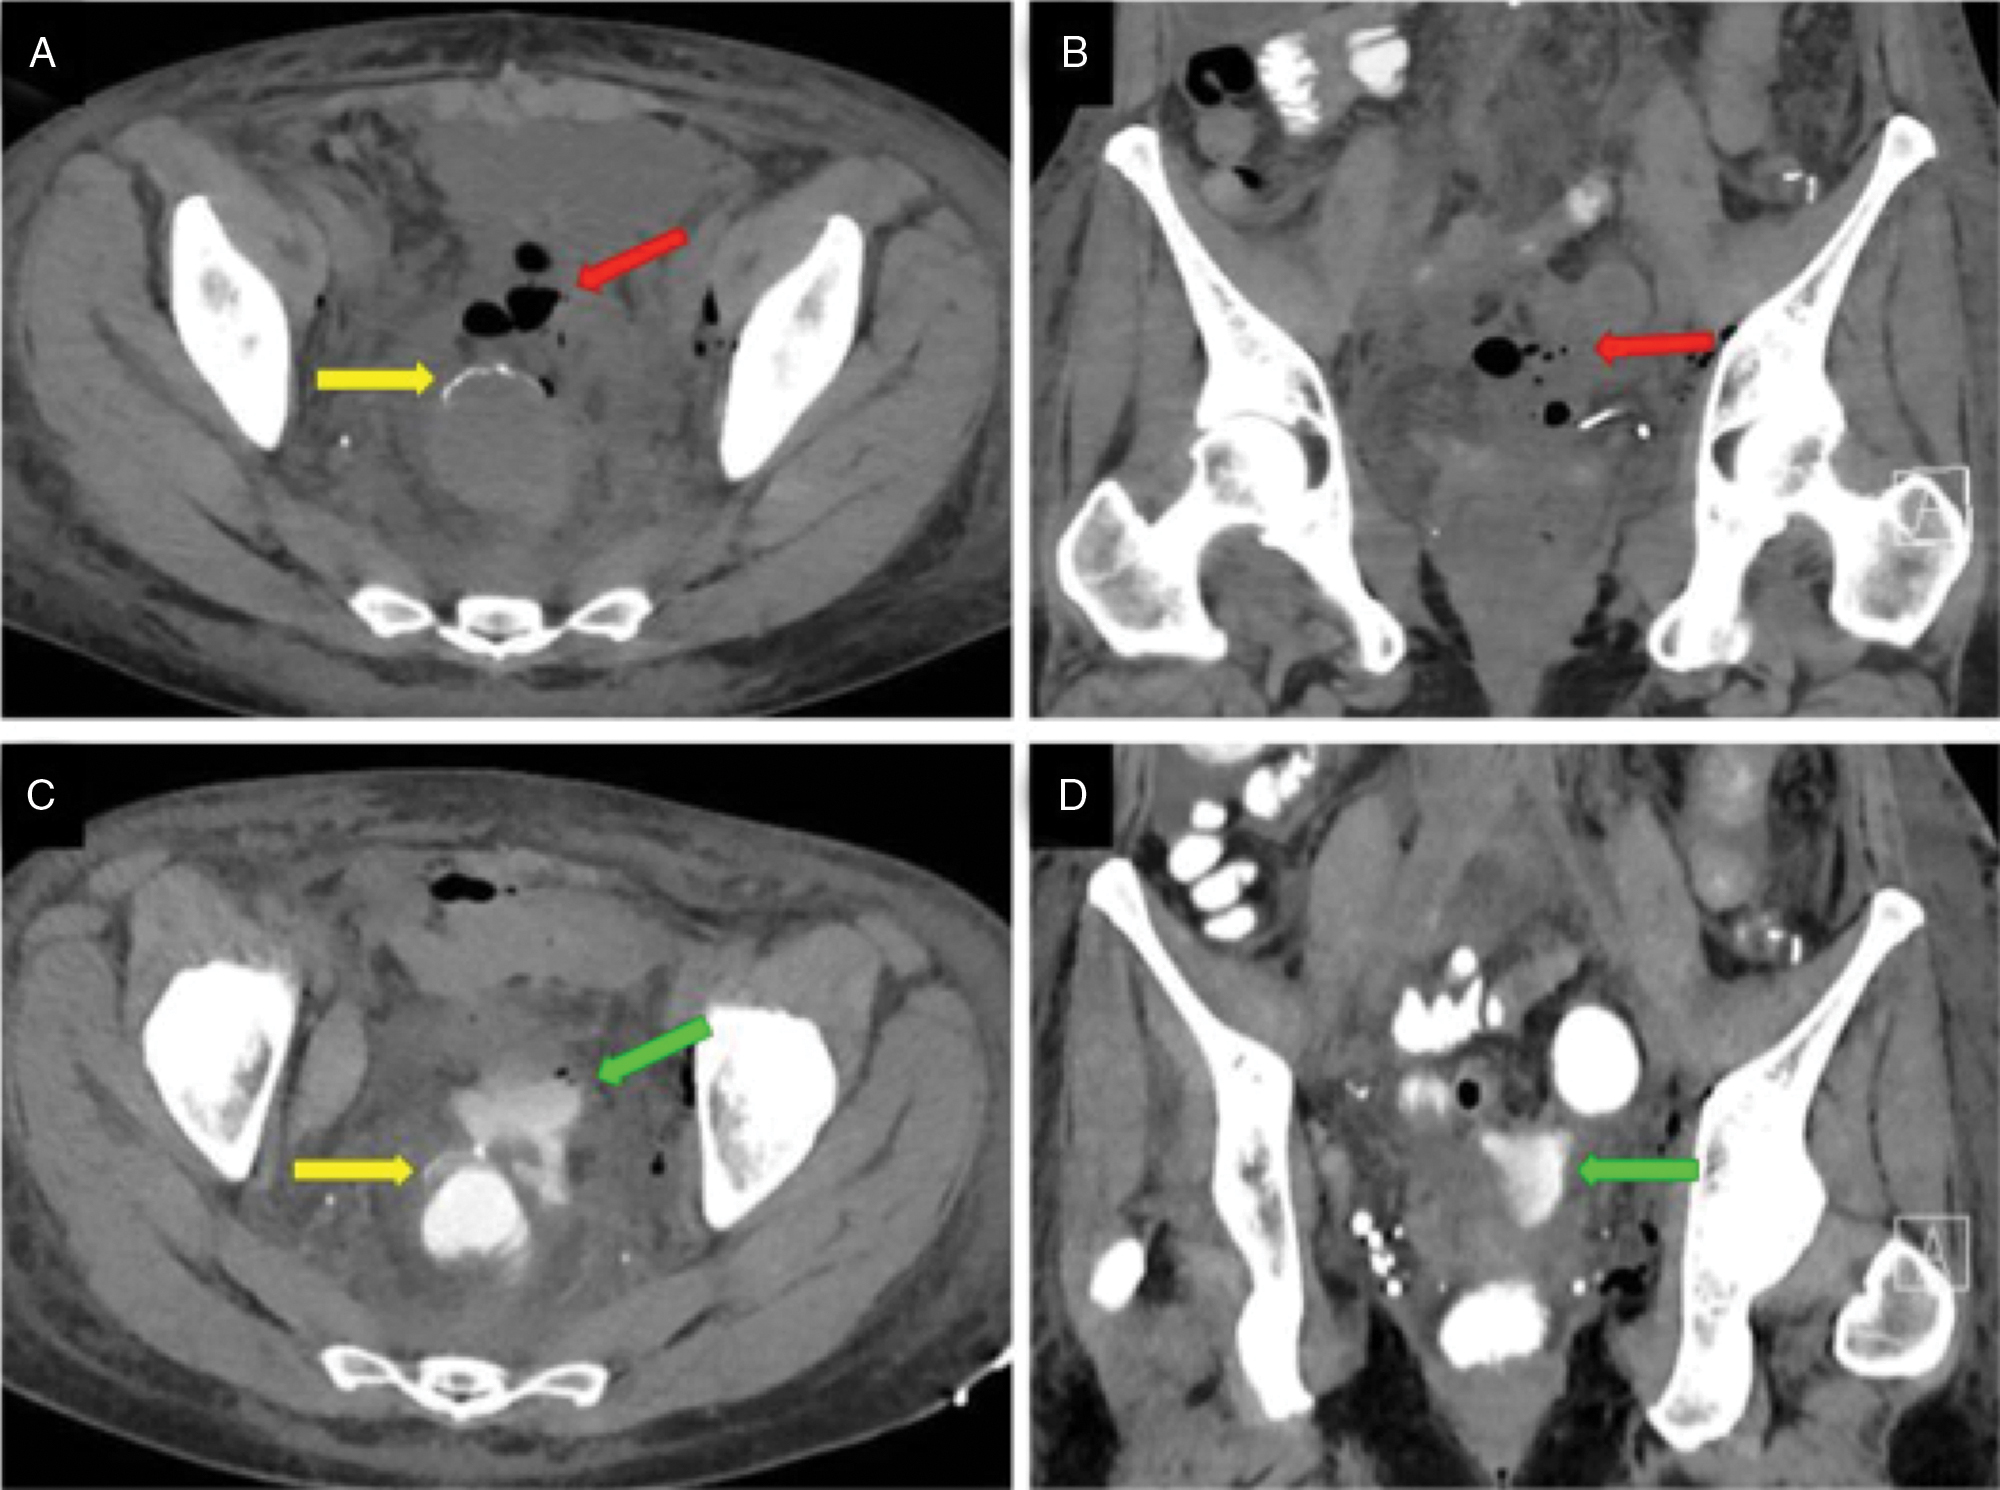 Fig. 37.8, 50-year-old female with metastatic ovarian cancer who is postoperative day 3 following radical hysterectomy, bilateral salpingo-oophorectomy, omental/peritoneal cytoreduction, and resection of rectosigmoid metastasis. A, B, Axial and coronal computed tomography (CT) at the level of the rectosigmoid anastomosis shows loculated foci of gas ( red arrow ) anterior to the suture line ( yellow arrow ). The possibility of an anastomotic leak was raised, but could not be confirmed because enteric contrast had only reached the distal ileum. C, D, Axial and coronal CT was performed 4 hours later at the same level, now clearly demonstrating extravasation of contrast into the peritoneum ( green arrow ). Patient was subsequently taken to the operating room where a defect anterior to the suture line was repaired.